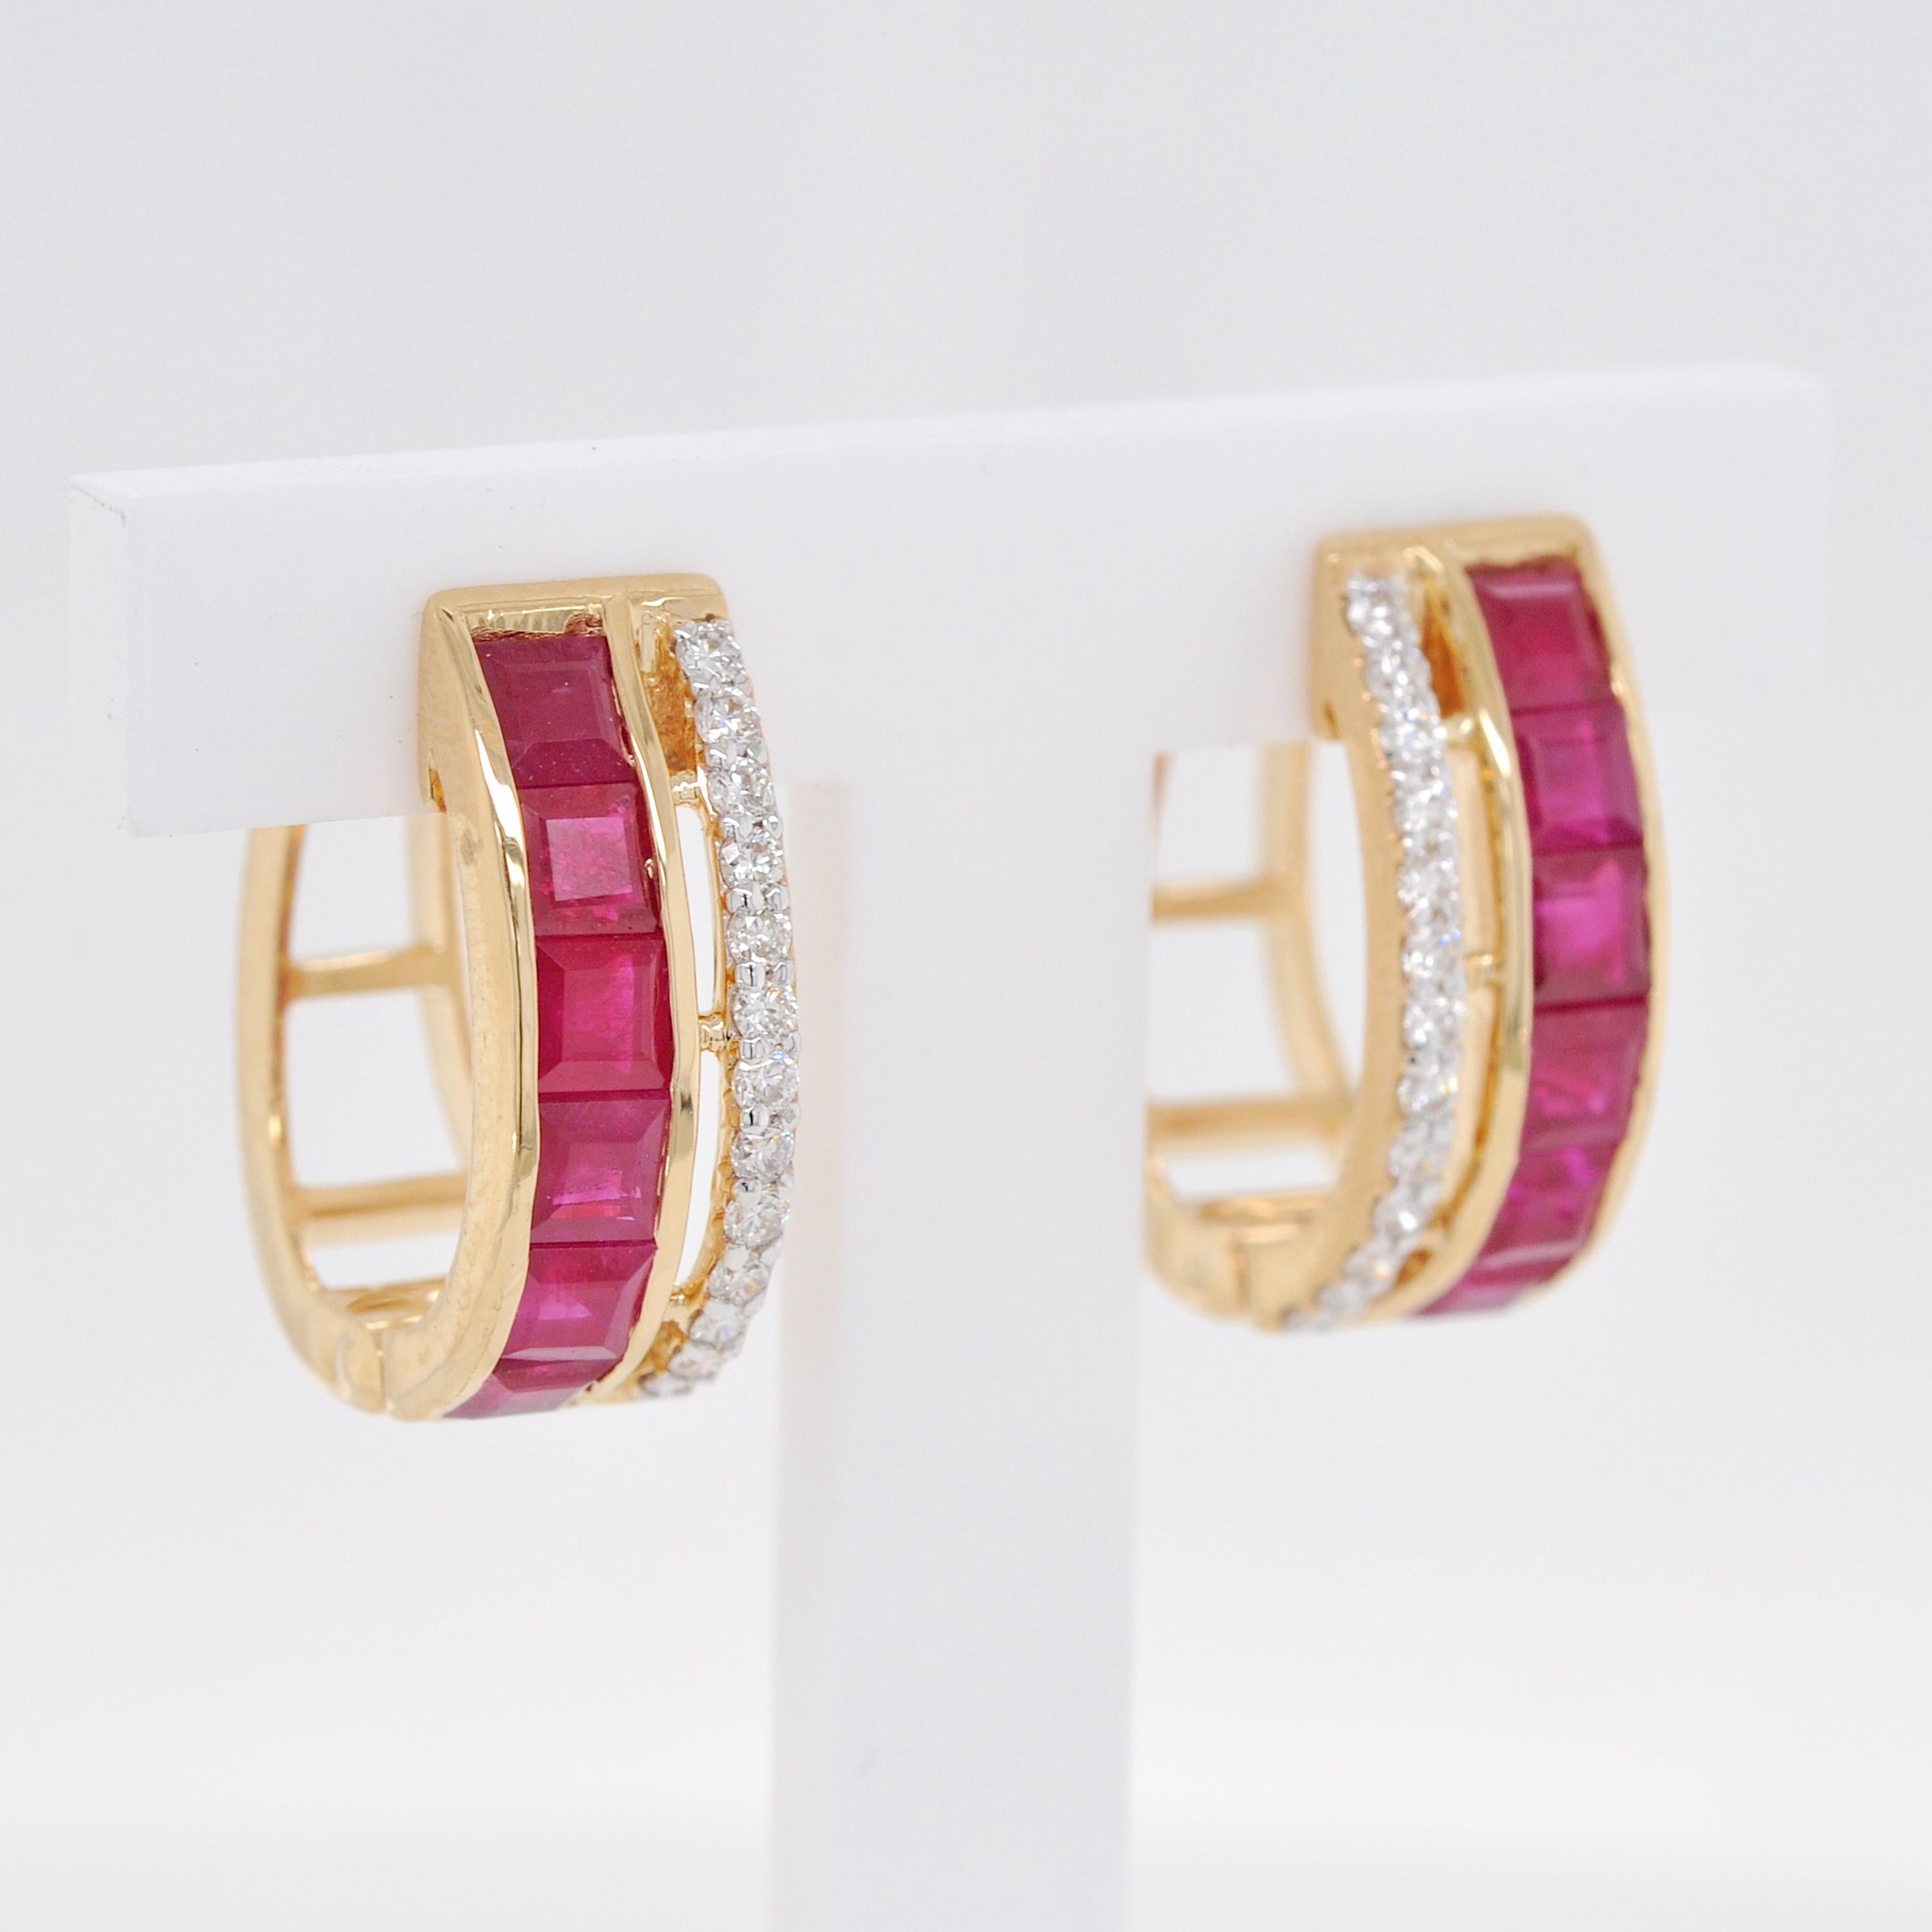 18K Yellow Gold 3 MM Square Mozambique Ruby Channel-set Diamond Hoop Earrings In New Condition For Sale In Jaipur, Rajasthan